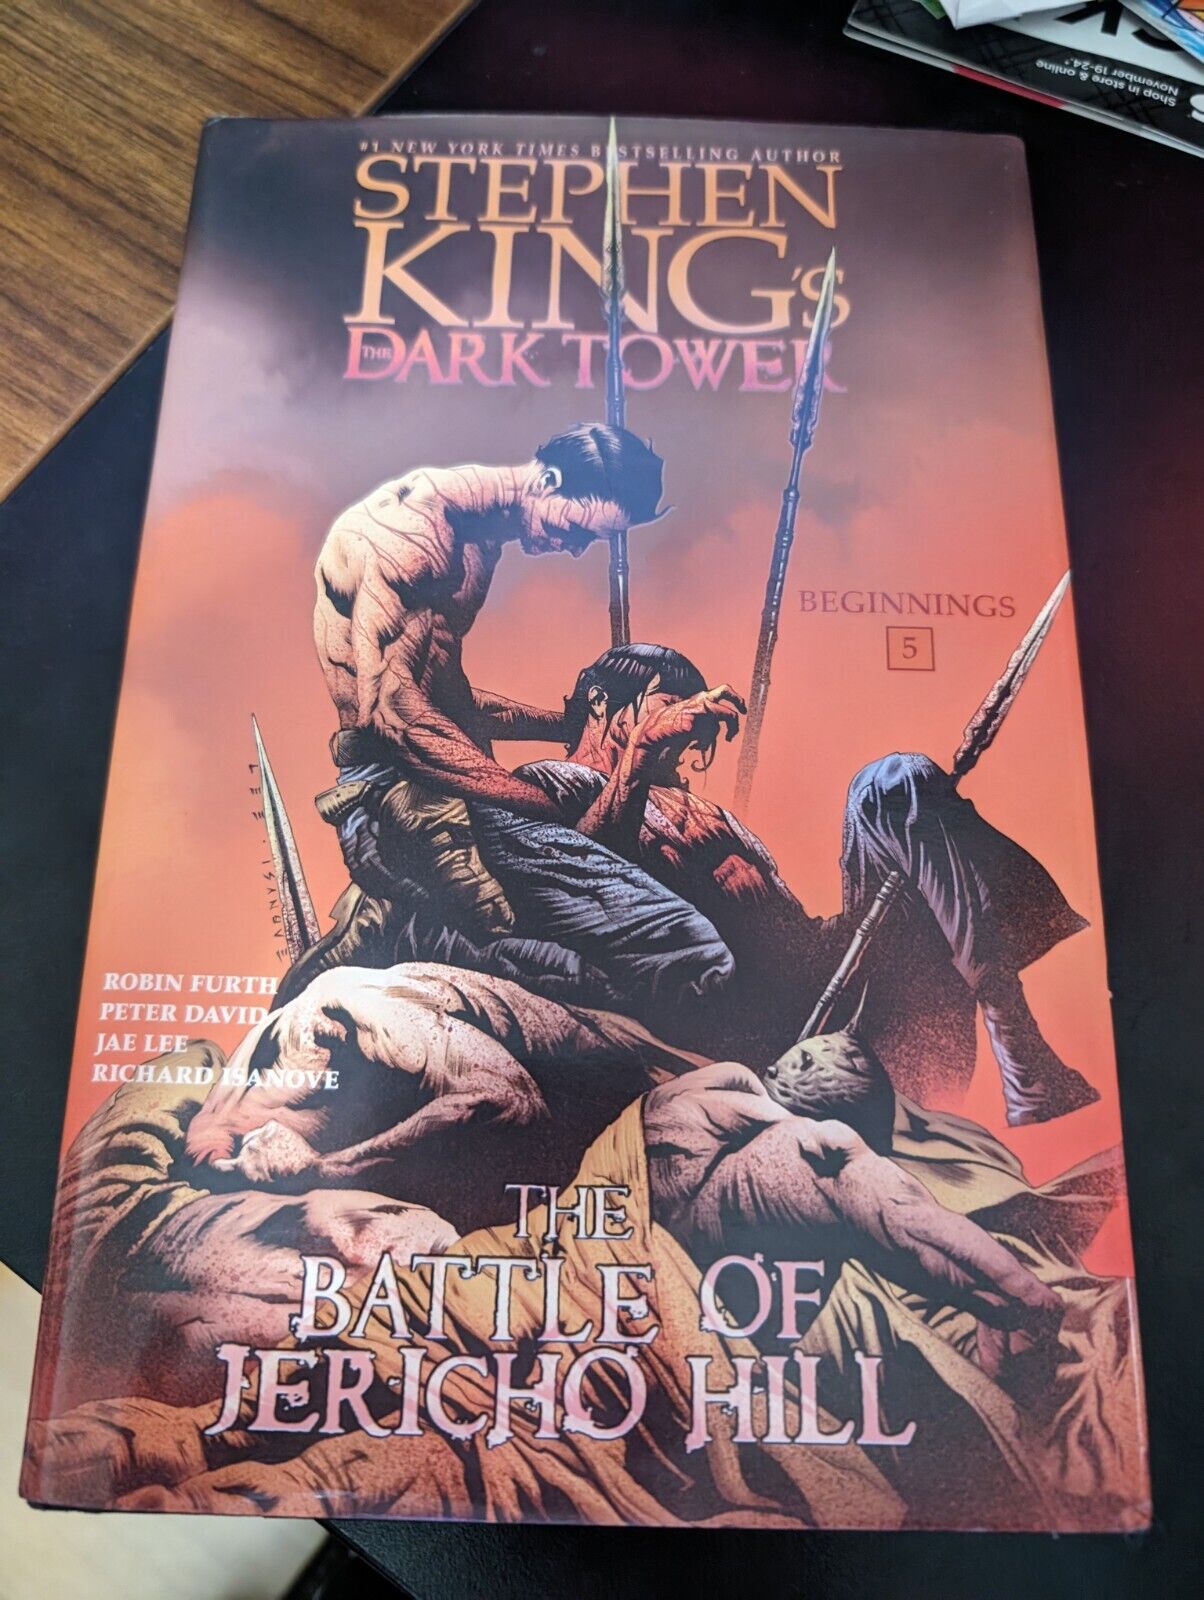 THE BATTLE OF JERICHO HILL (5) (STEPHEN KING'S THE DARK TOWER